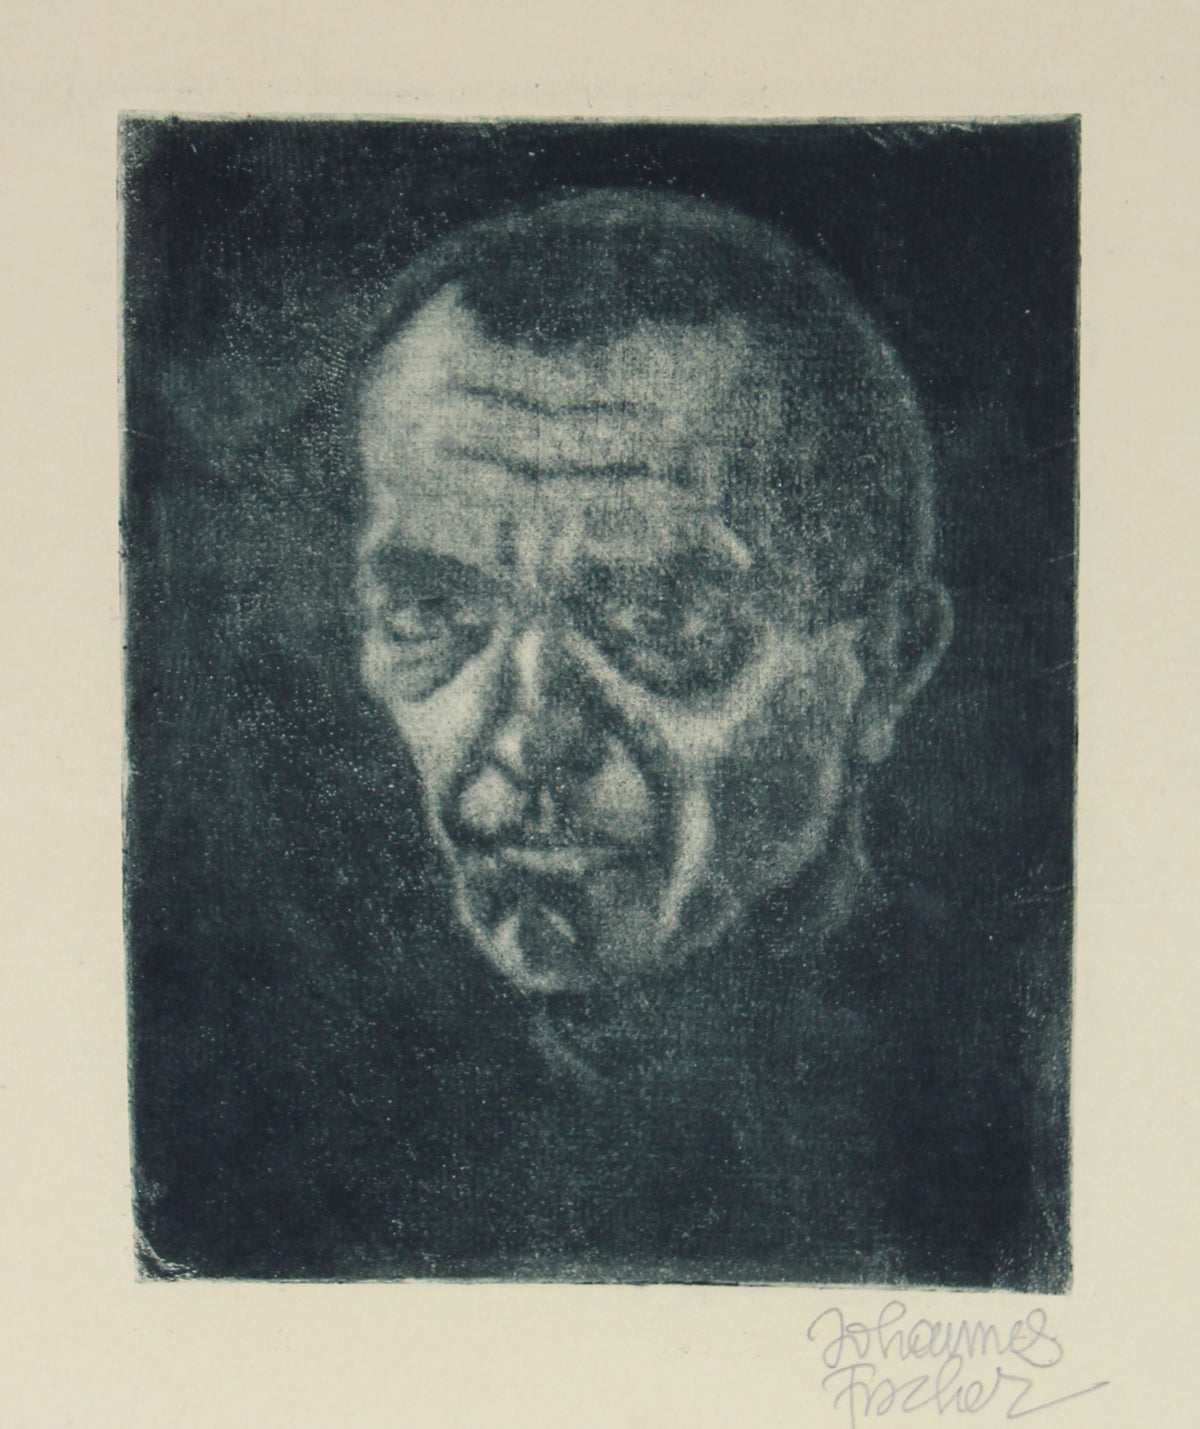 Portrait from the Austrian Secession&lt;br&gt;1920s Etching&lt;br&gt;&lt;br&gt;#60118